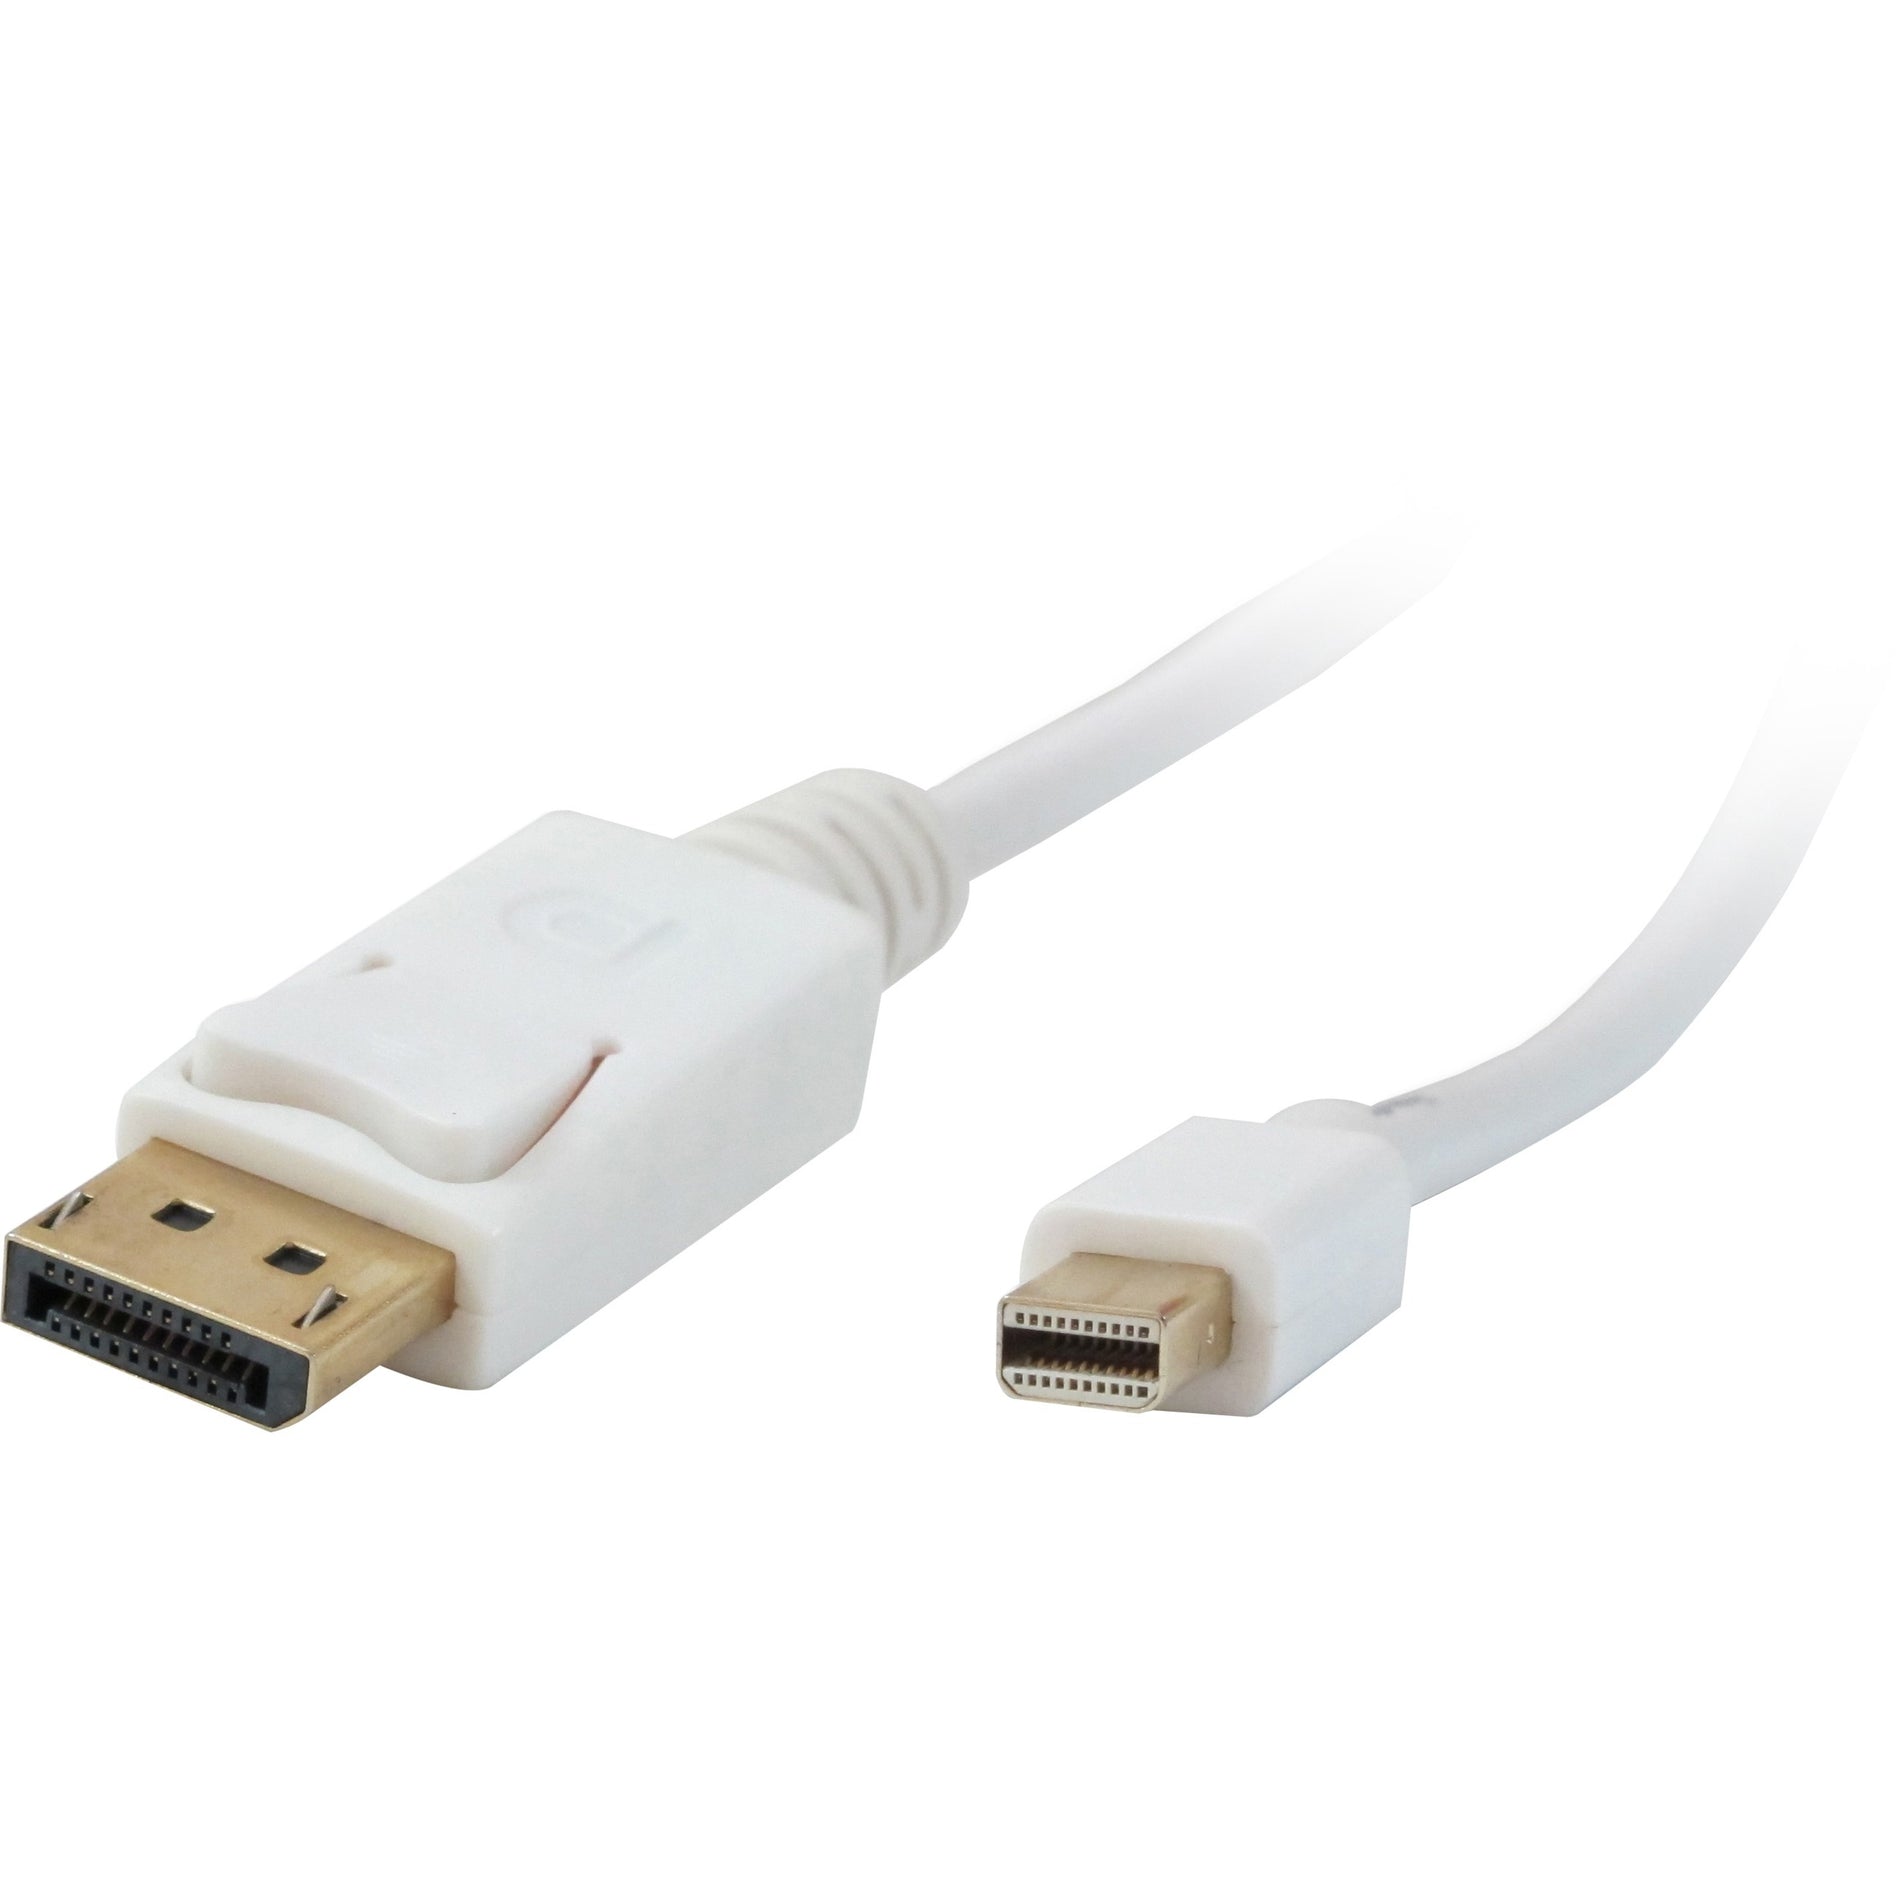 Comprehensive MDP-DISP-10ST Mini DisplayPort Male to DisplayPort Male Cable 10ft, High-Speed Data Transfer, Lifetime Warranty